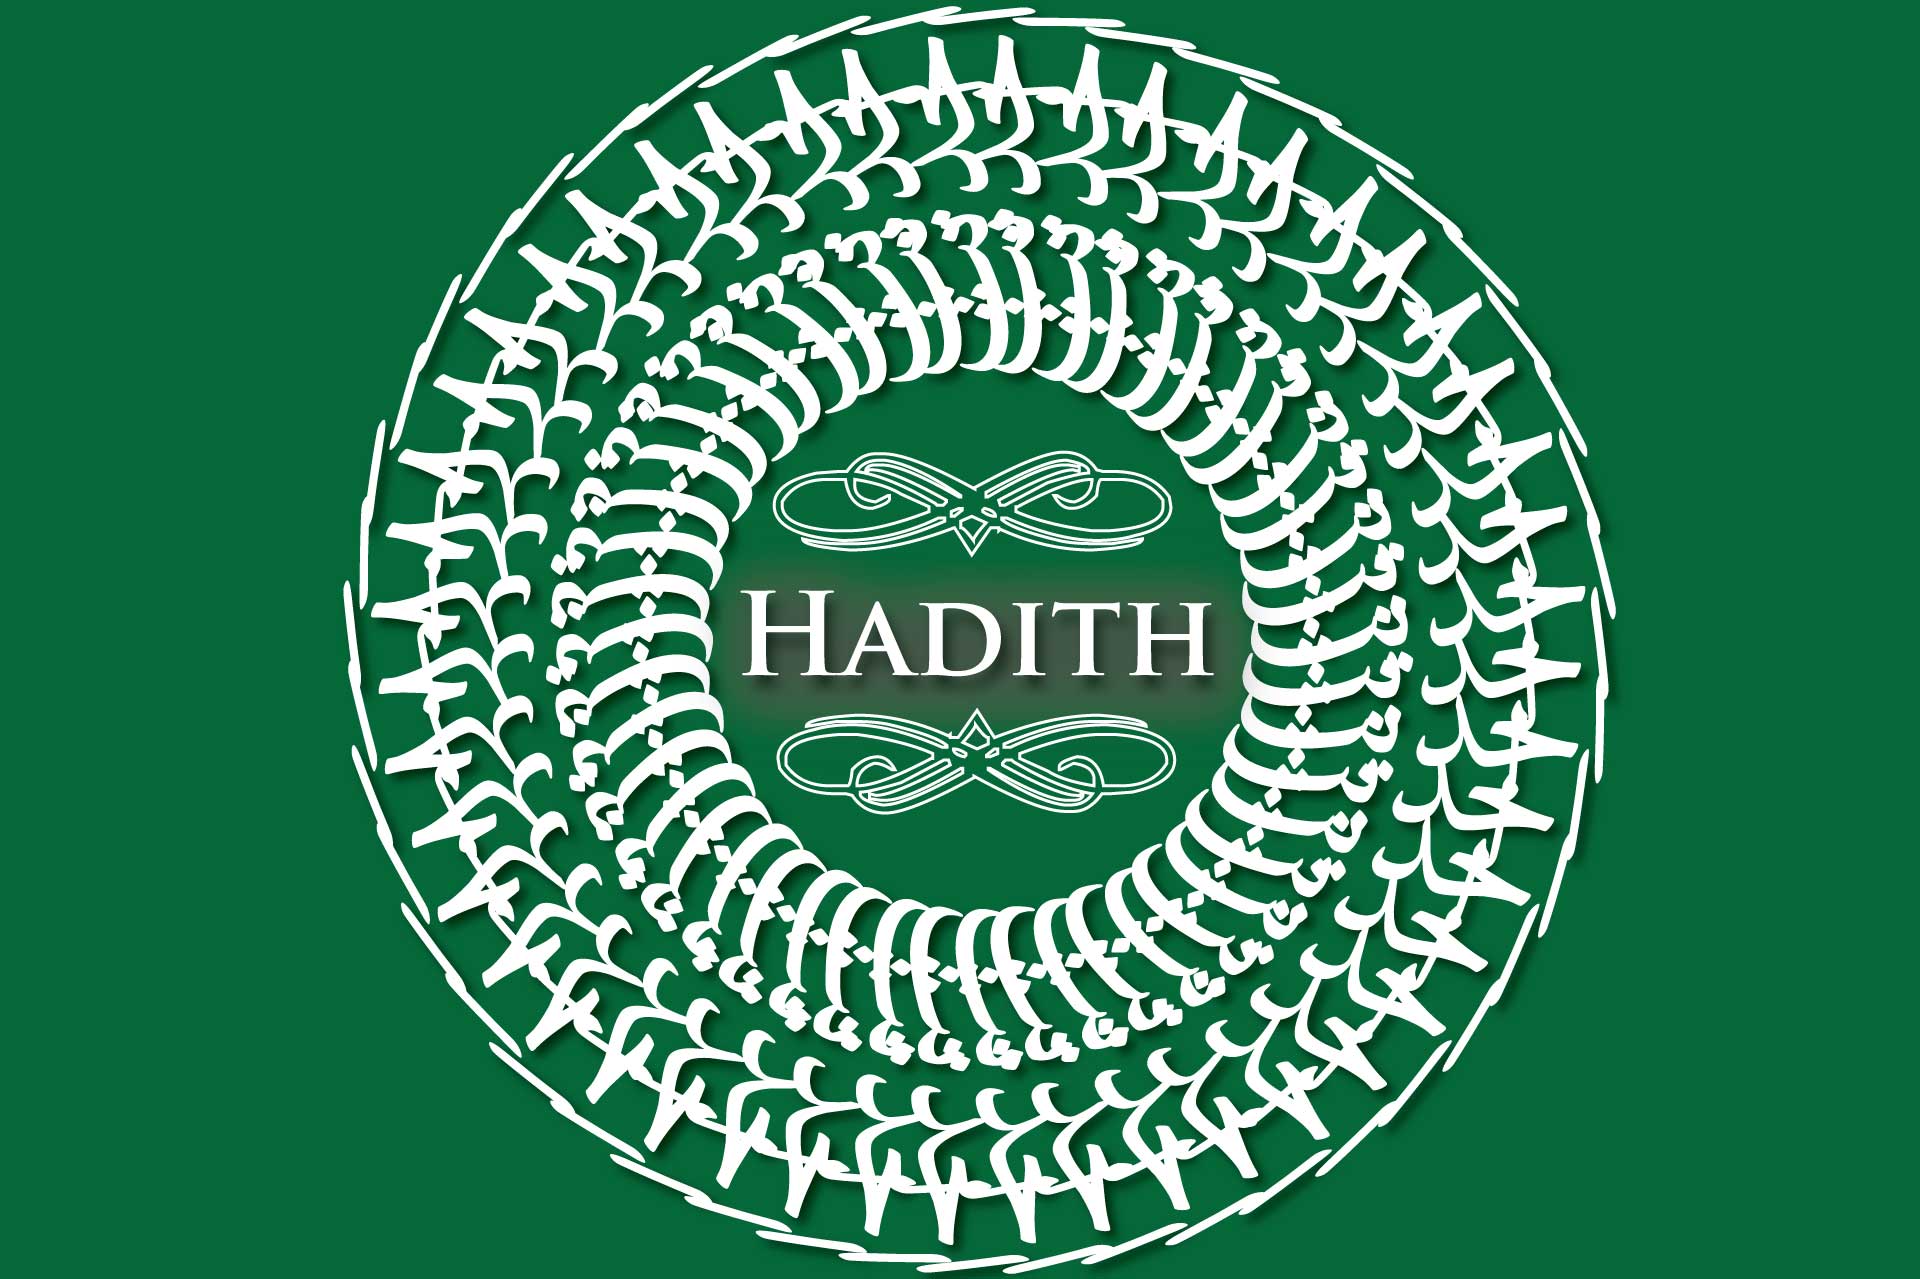 The Meaning of “Hadith”